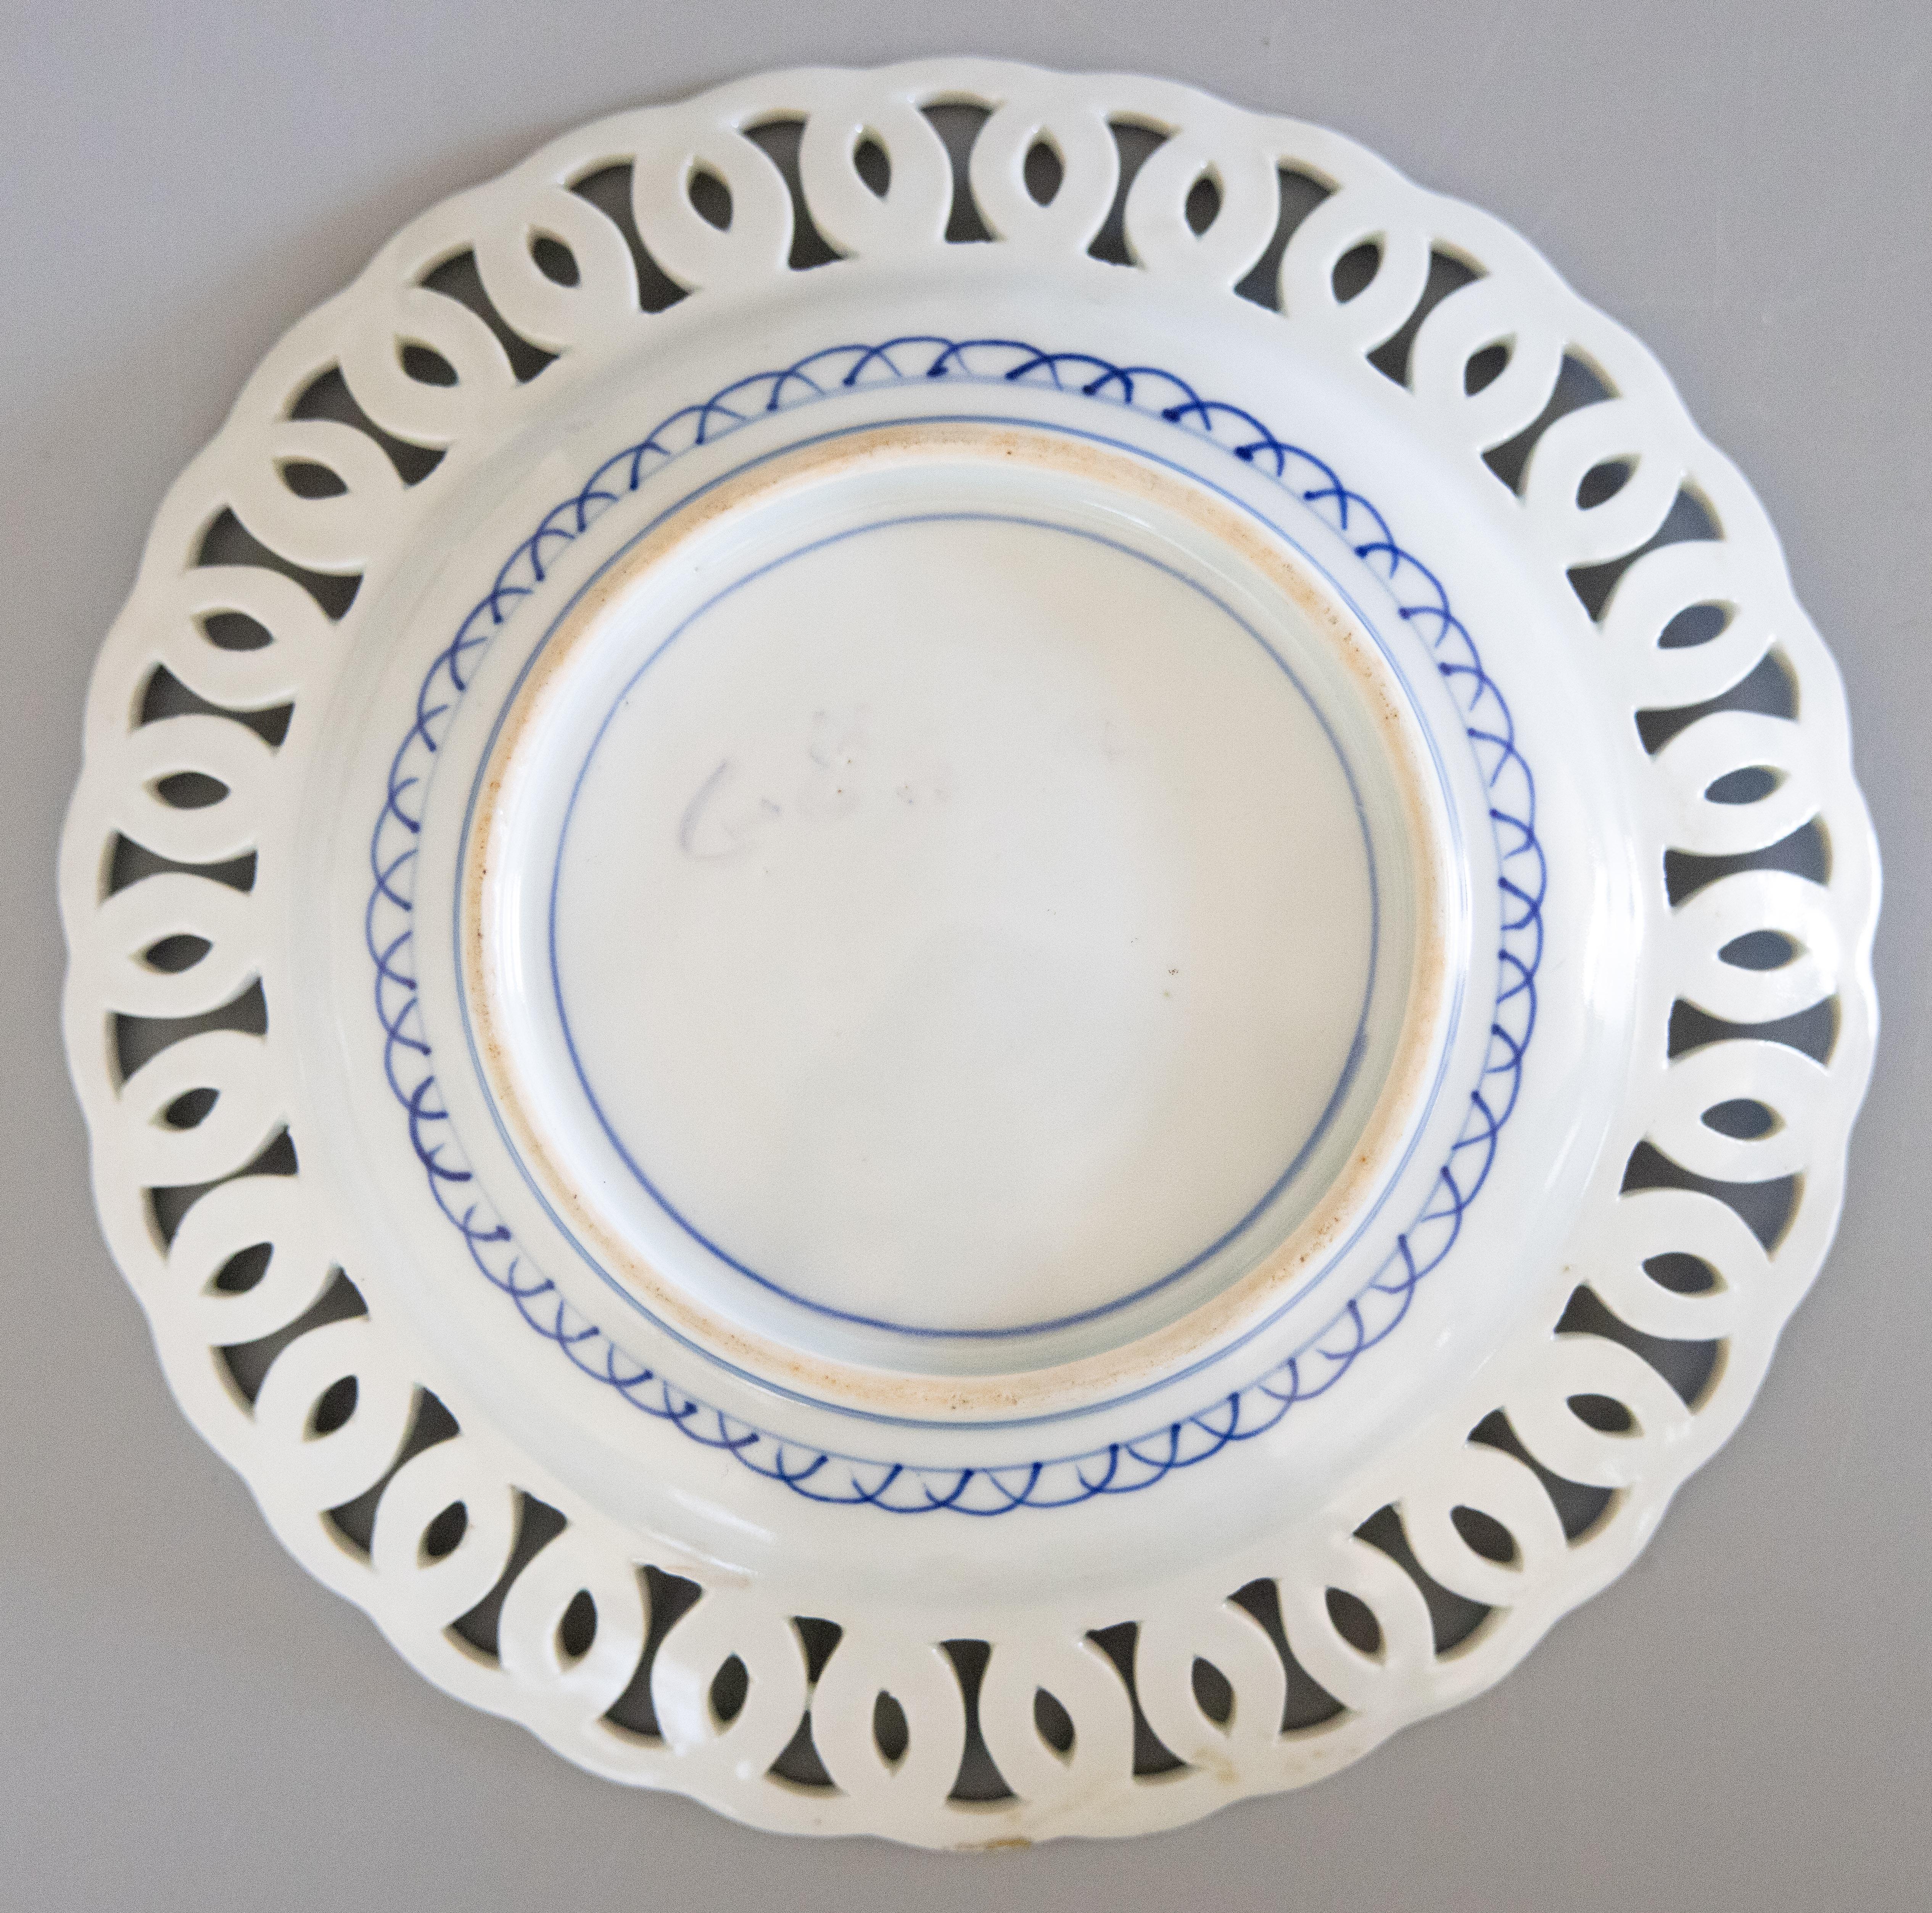 Large 19th Century Imari Plate With Reticulated Open Pierced Rim In Good Condition For Sale In Pearland, TX